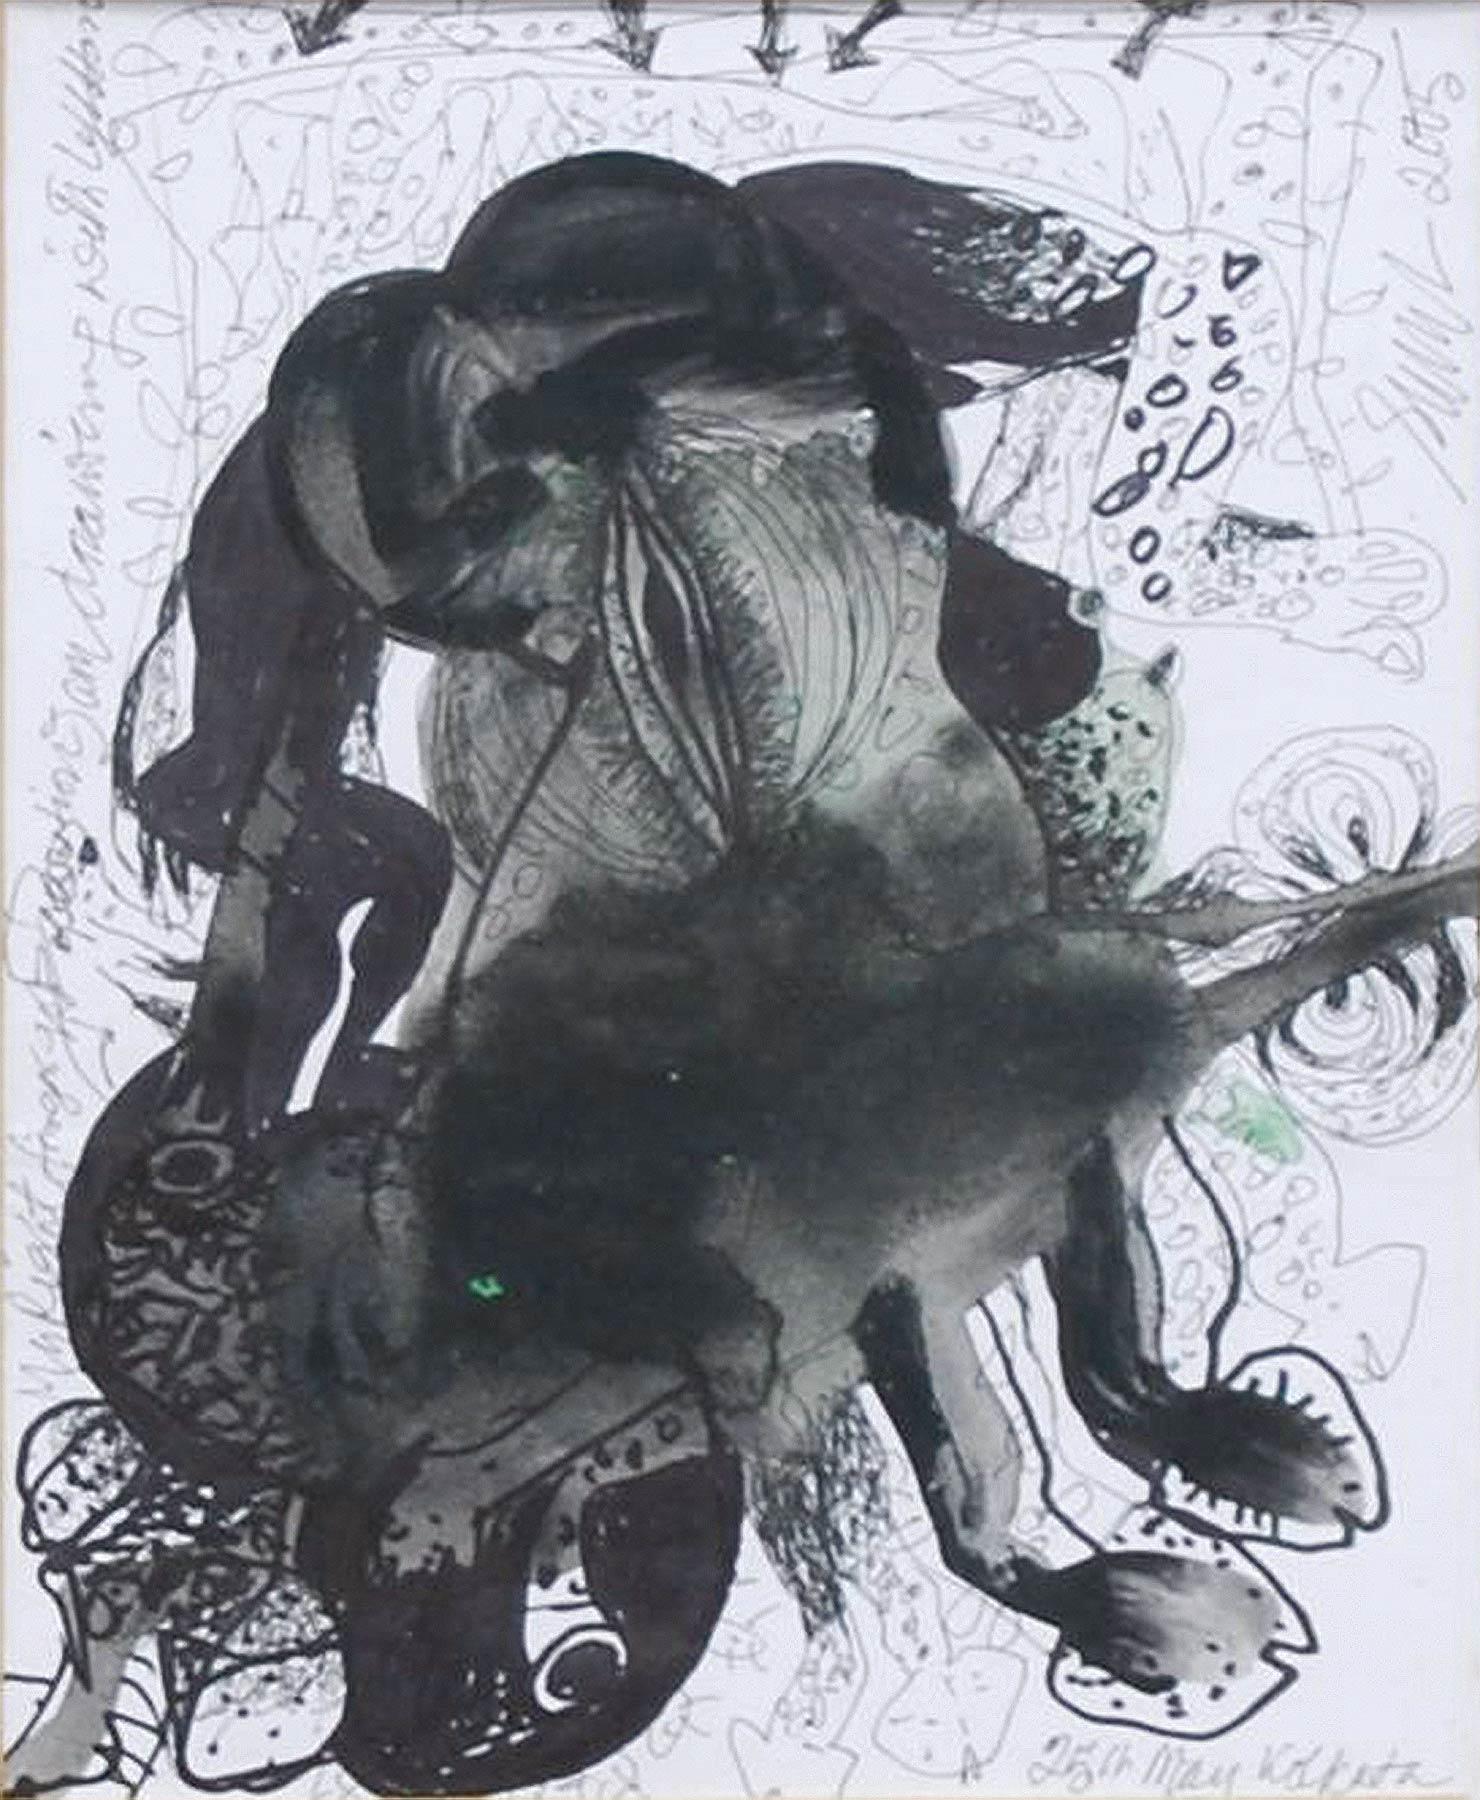 Sunil Das Figurative Painting - Ink Drawings on Thick Paper, Black & White by Padma Shree Awardee "In Stock"